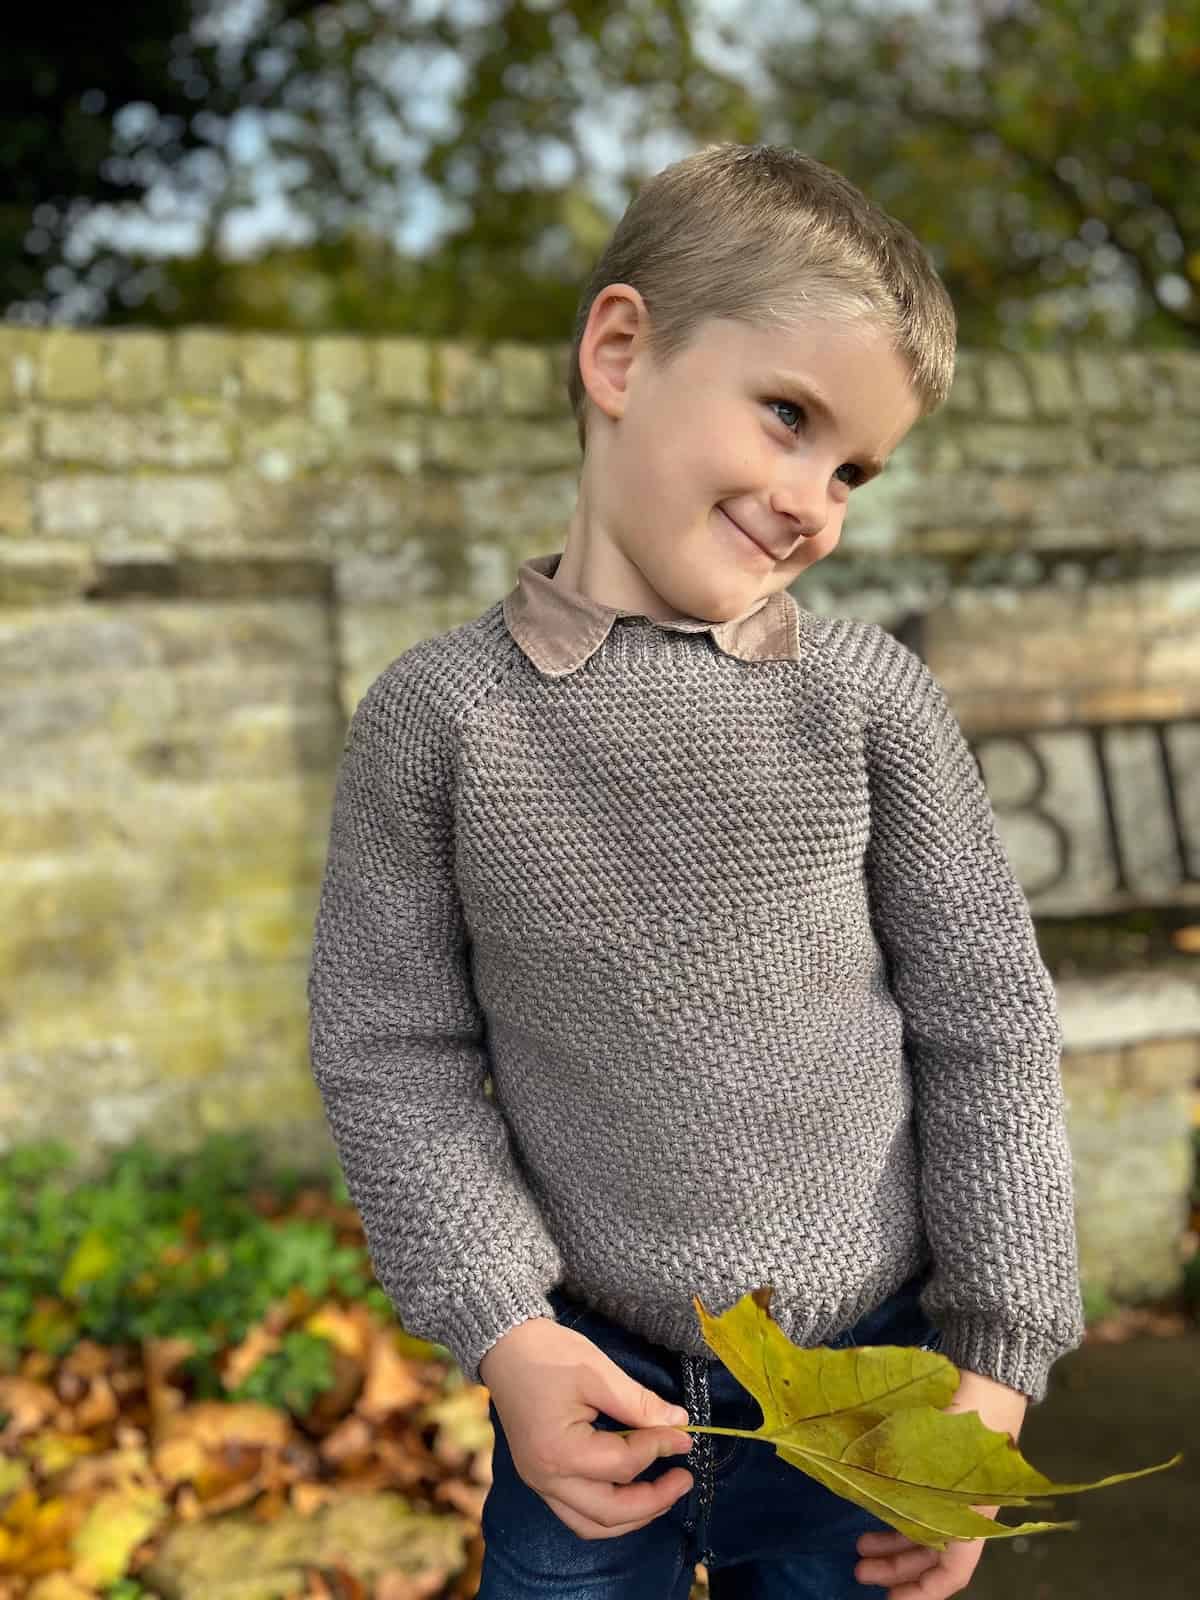 Boy wearing crochet sweater holding leaf and smiling.